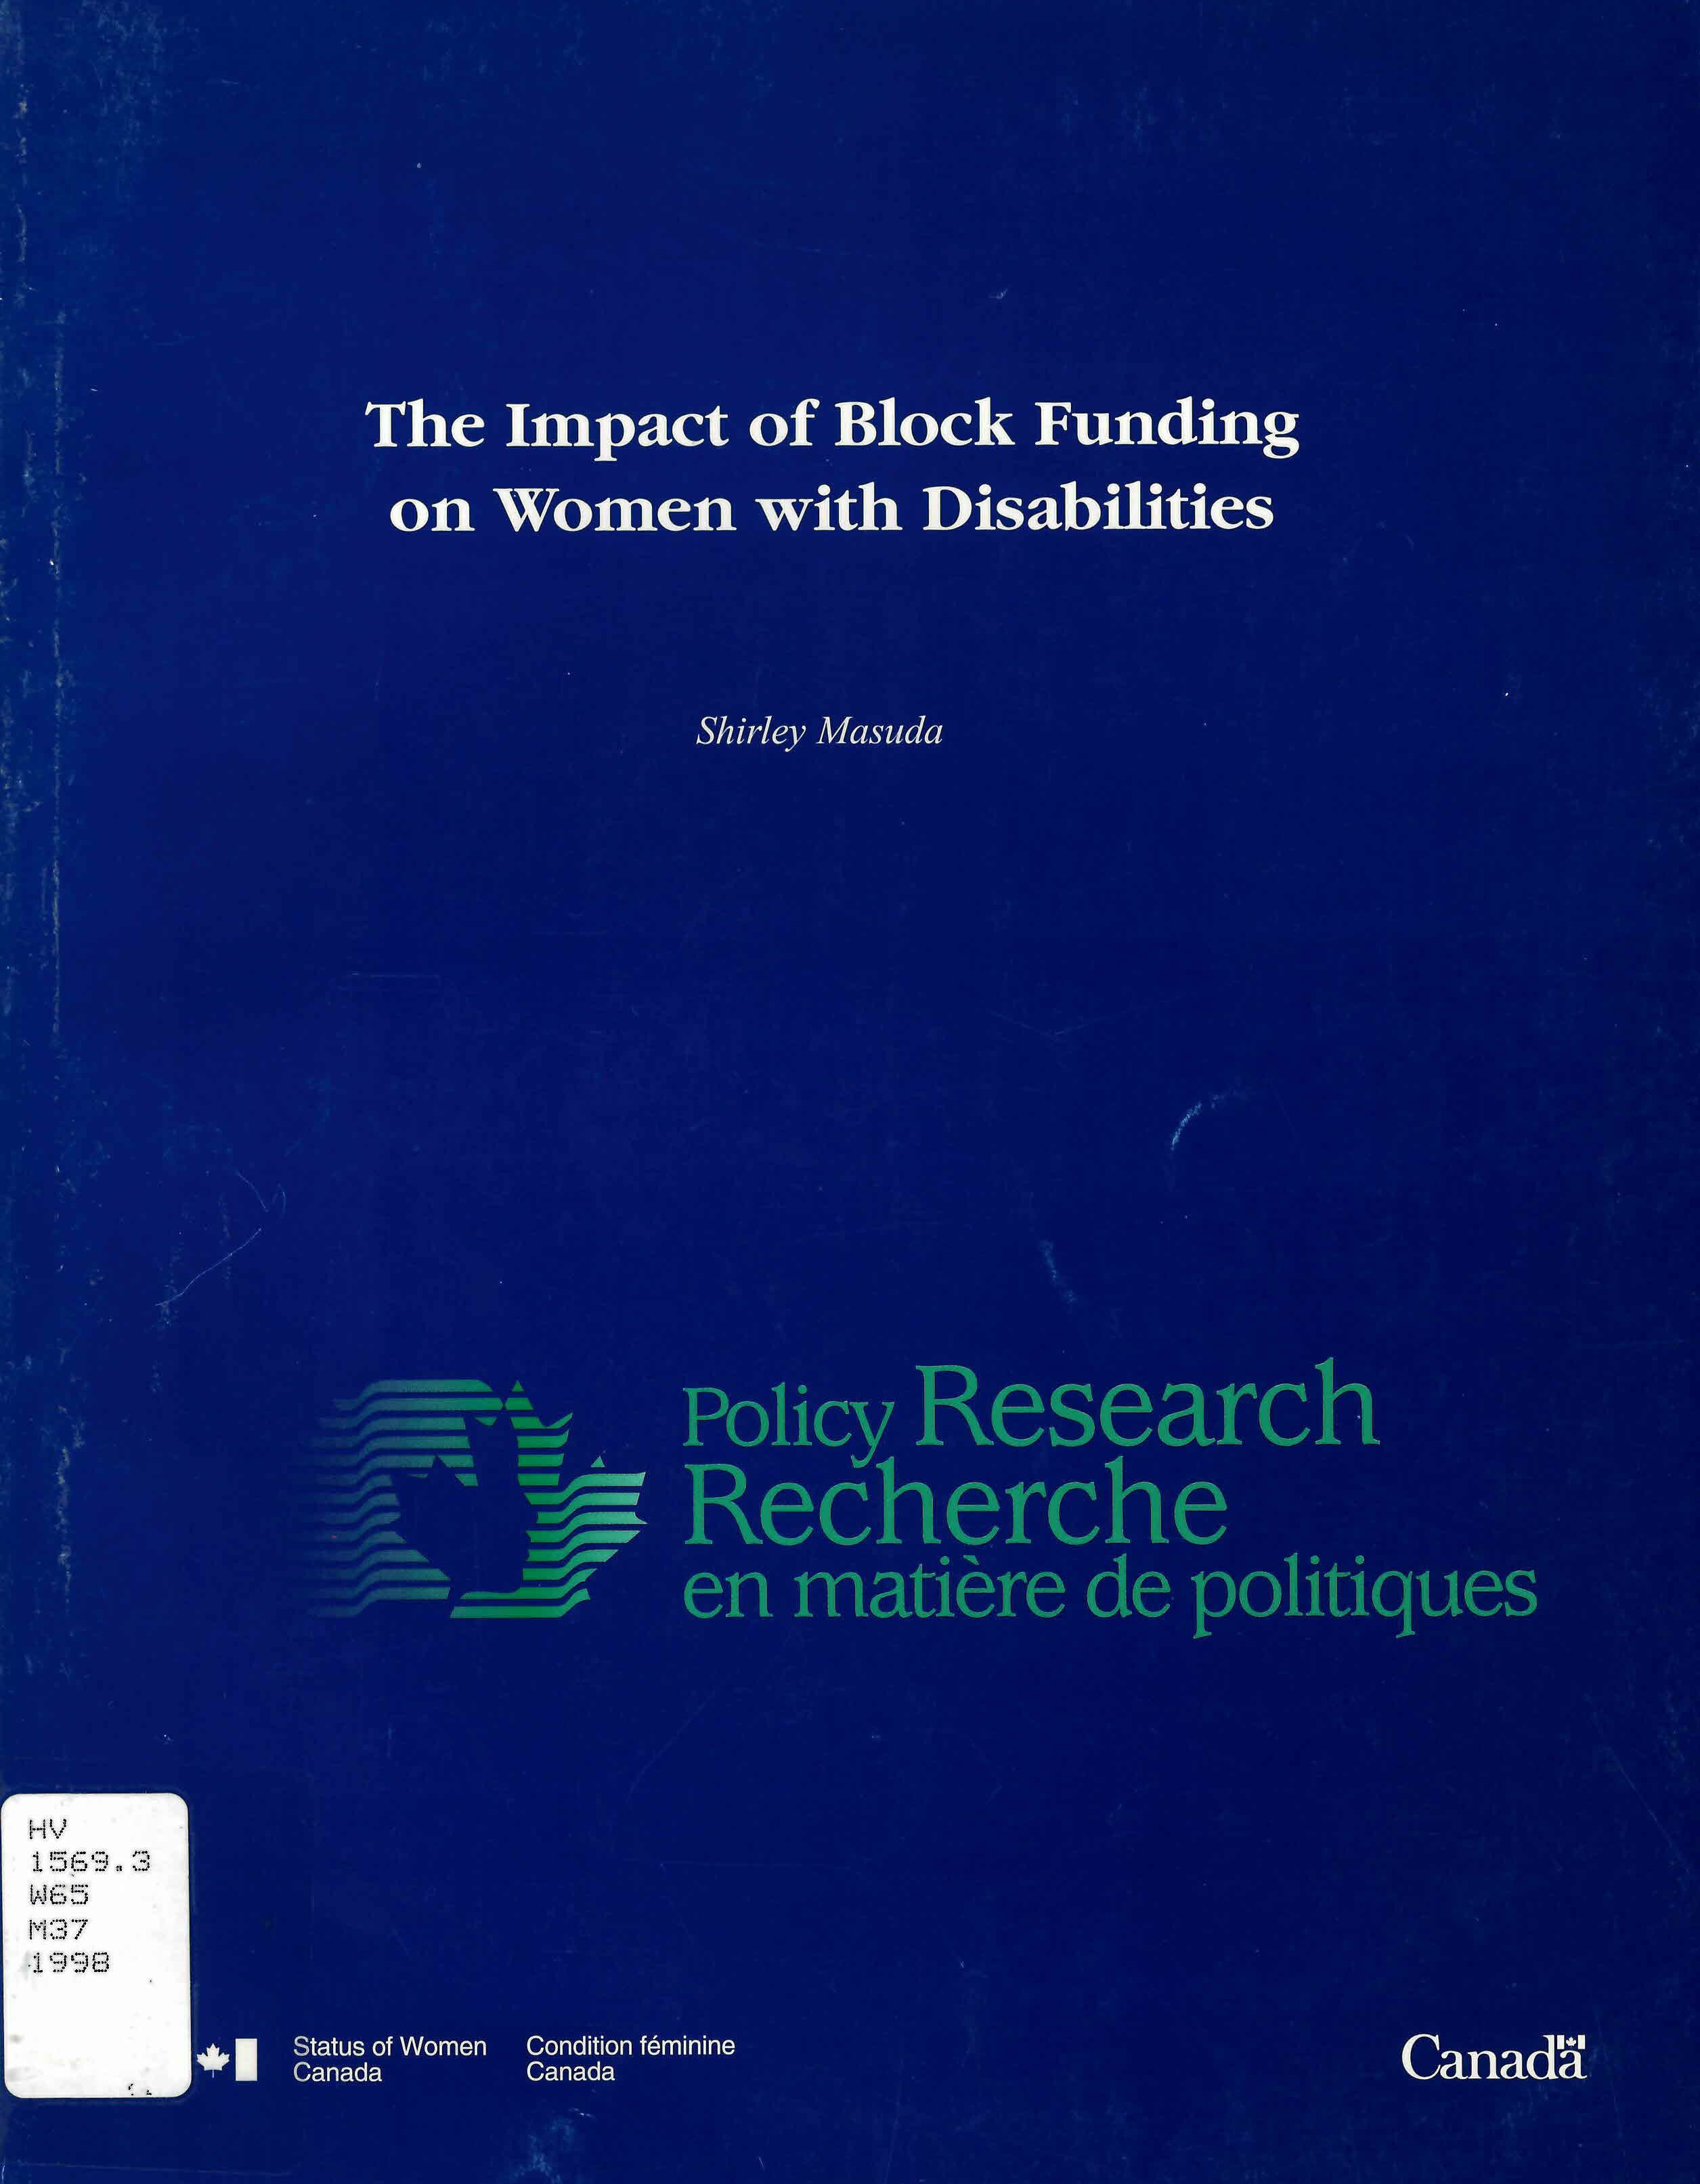 The impact of block funding on women with disabilities